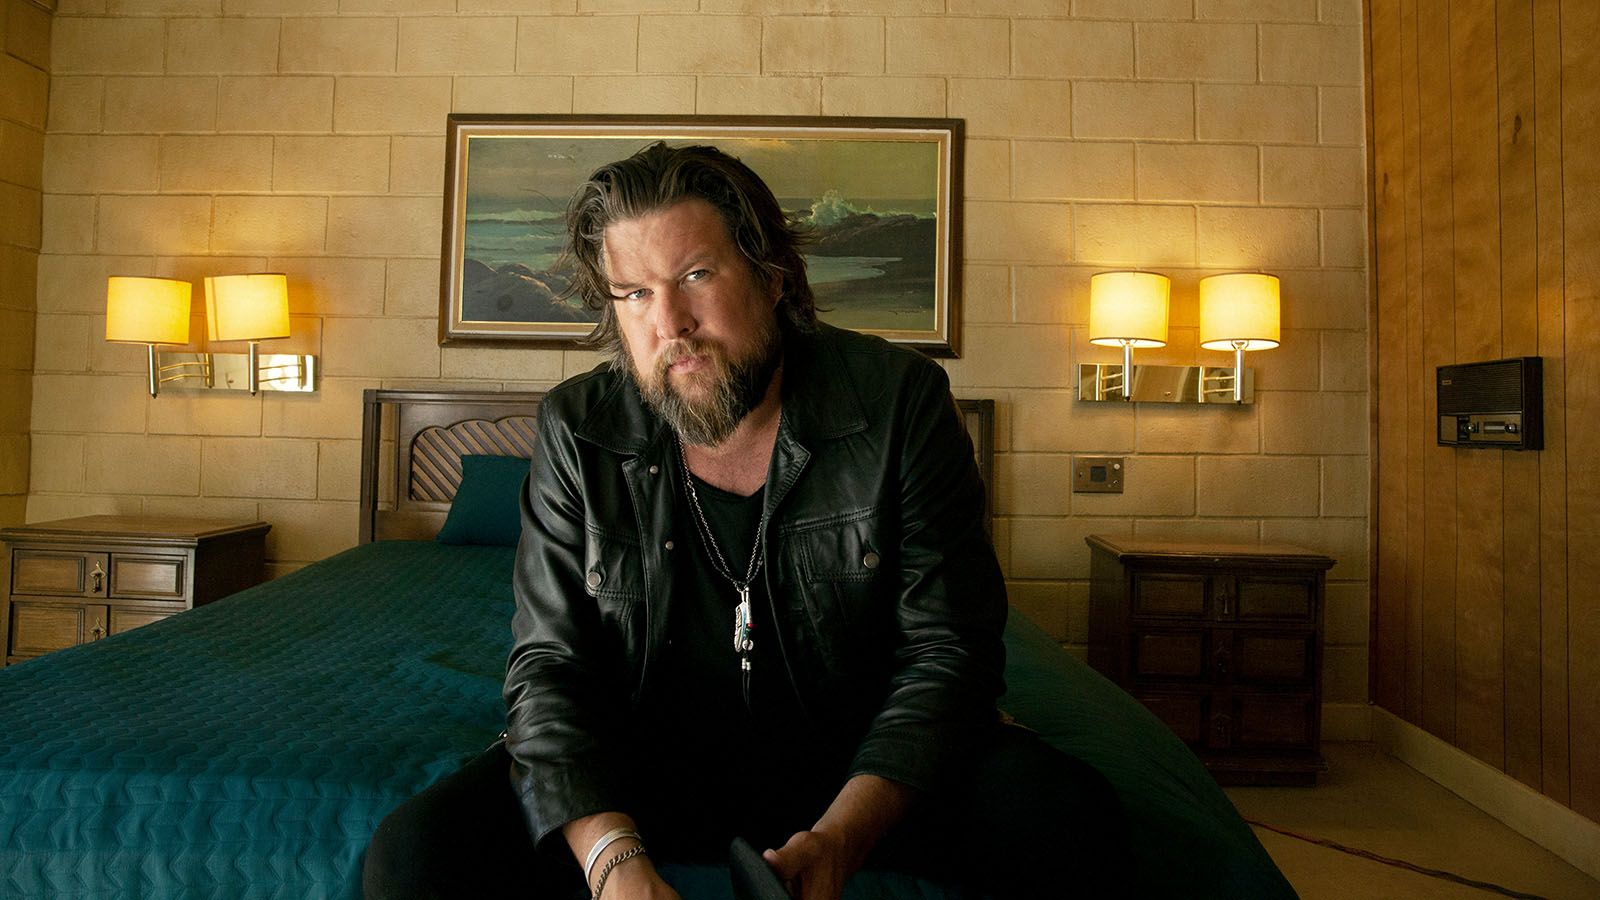 Zach Williams will be at Sweetwater Performance Pavilion on Aug. 1.